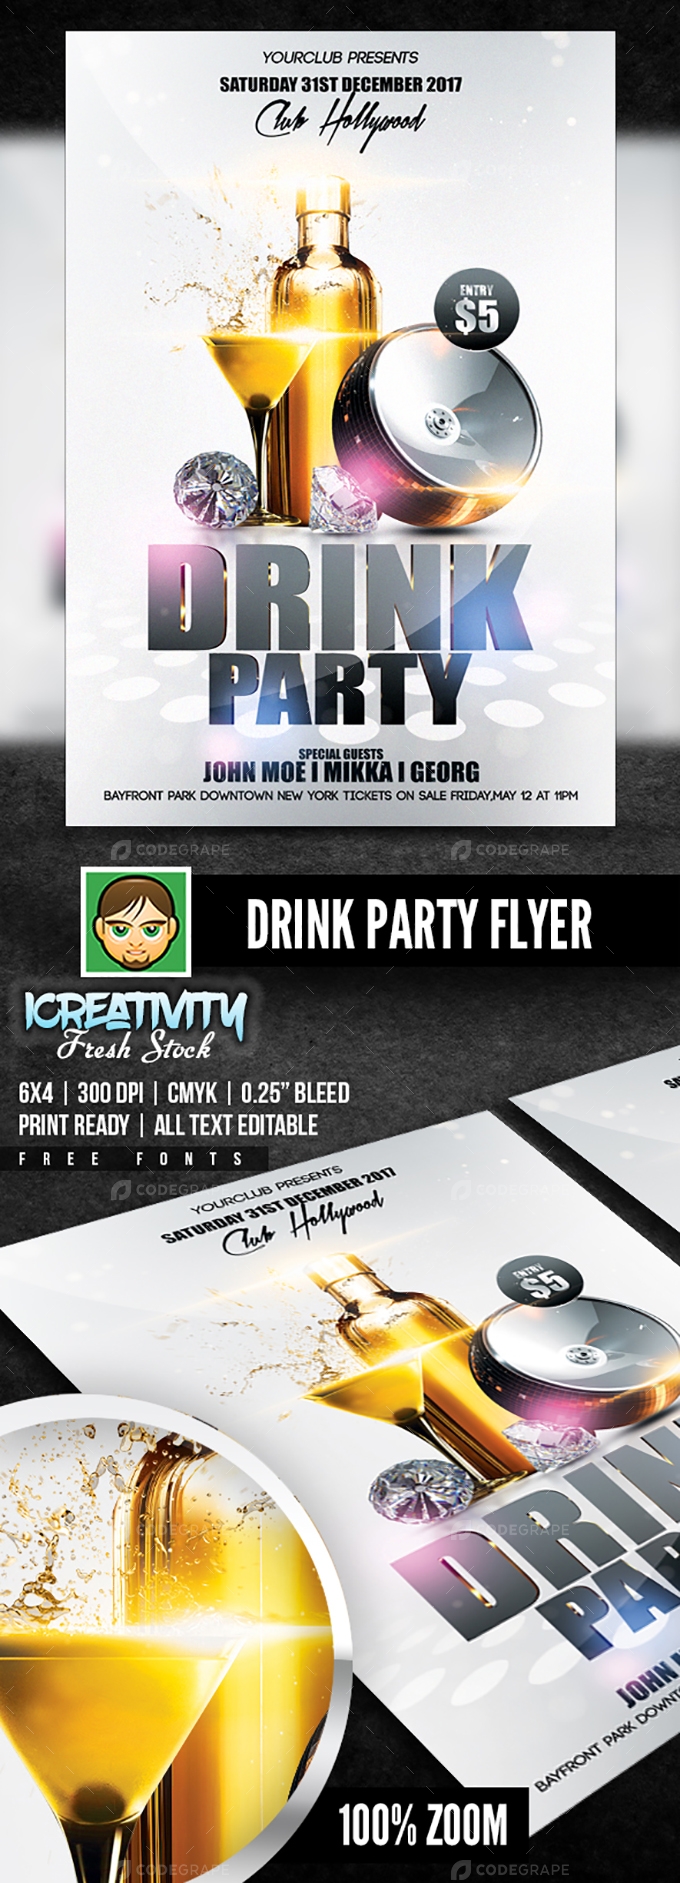 Drink Party Flyer